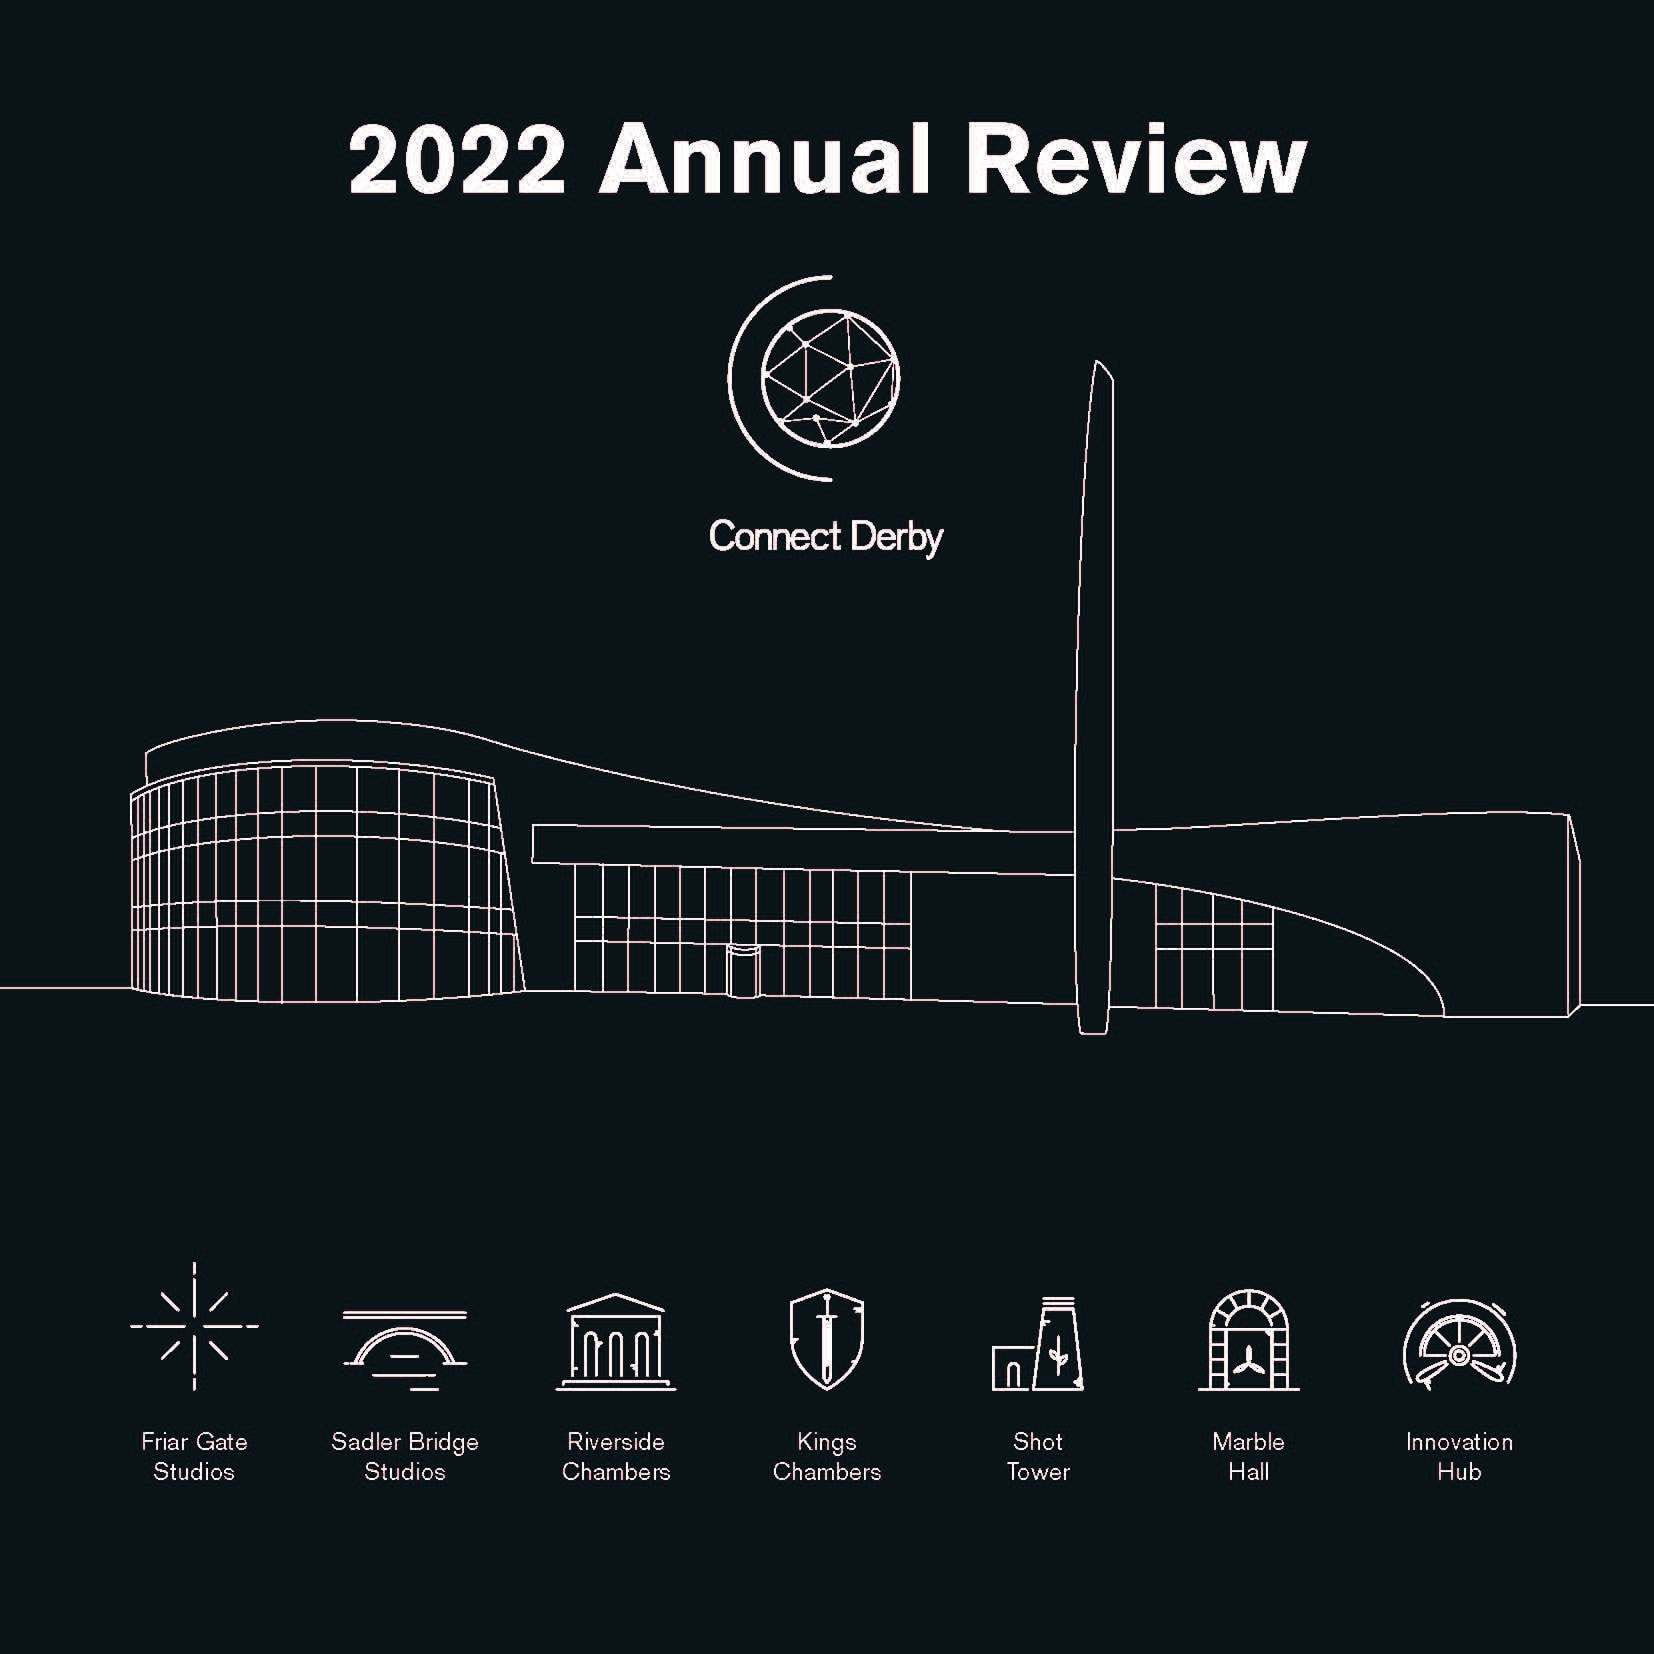 Connect Derby’s 2022 Annual Review